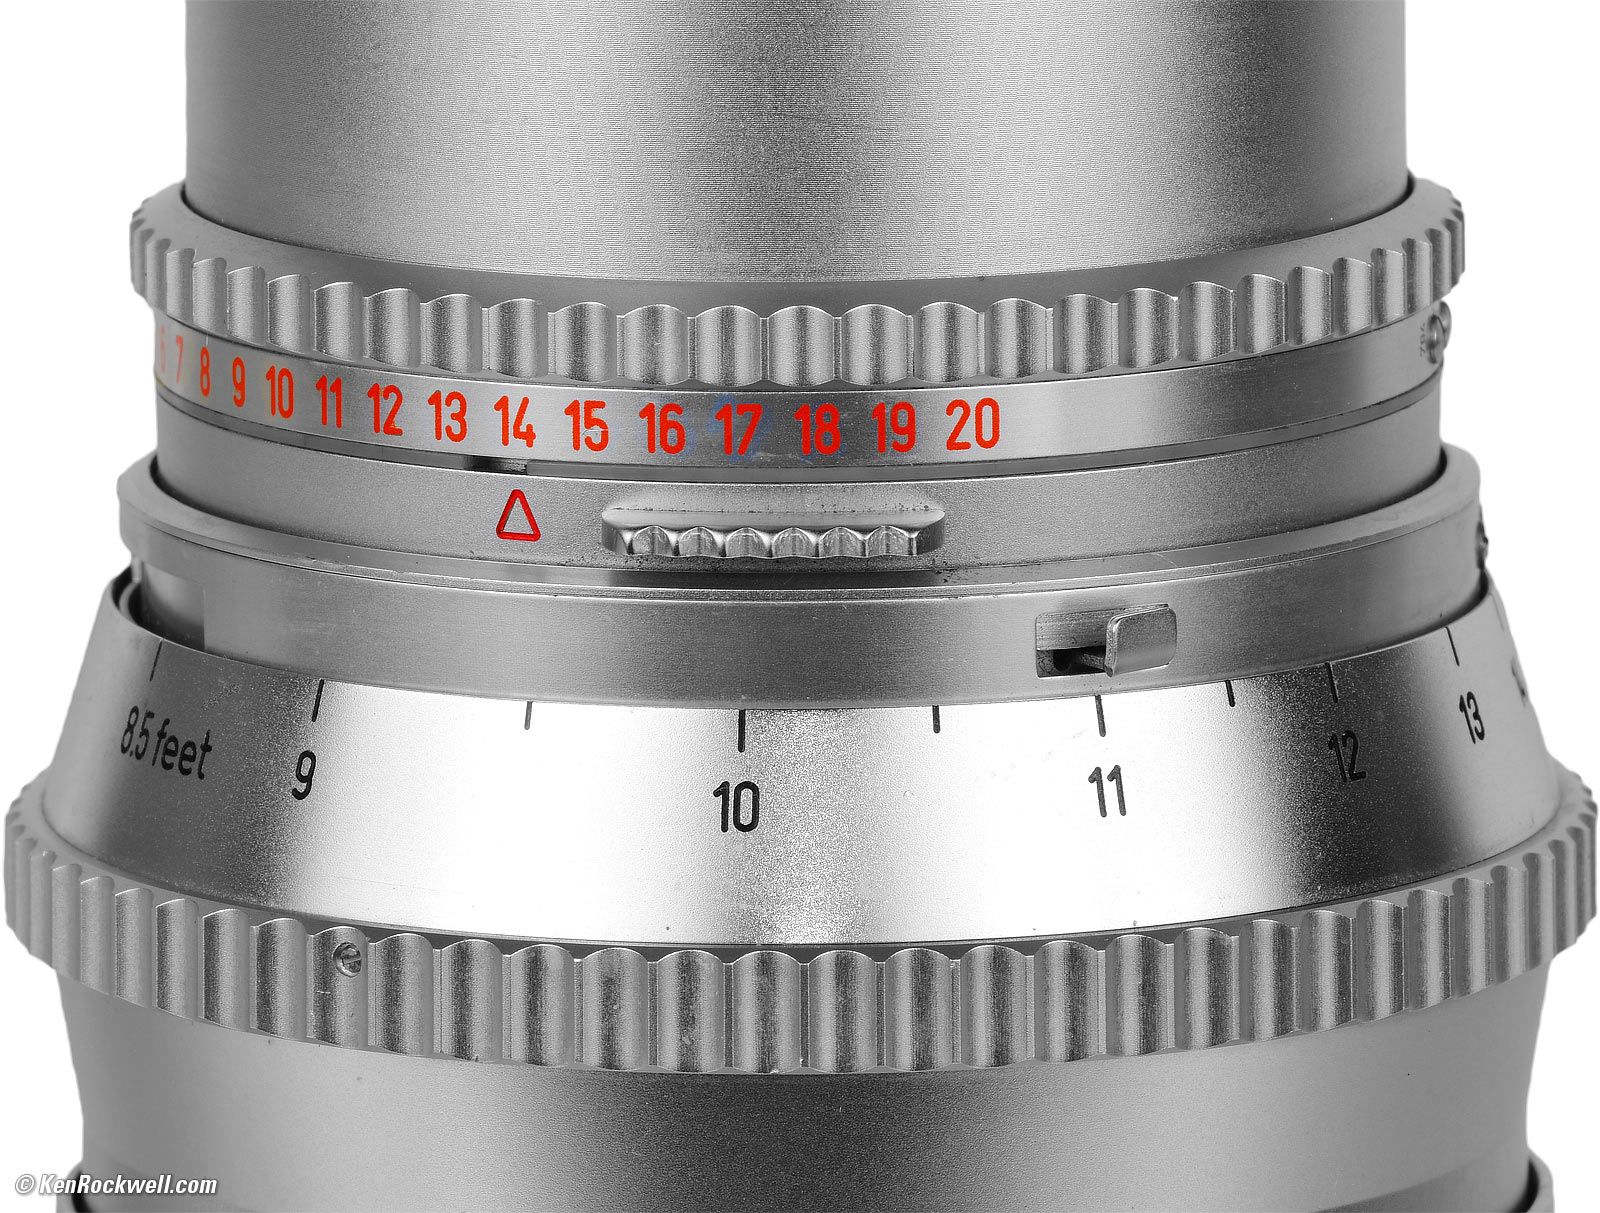 Hasselblad Zeiss Sonnar 250mm f/5.6 Review